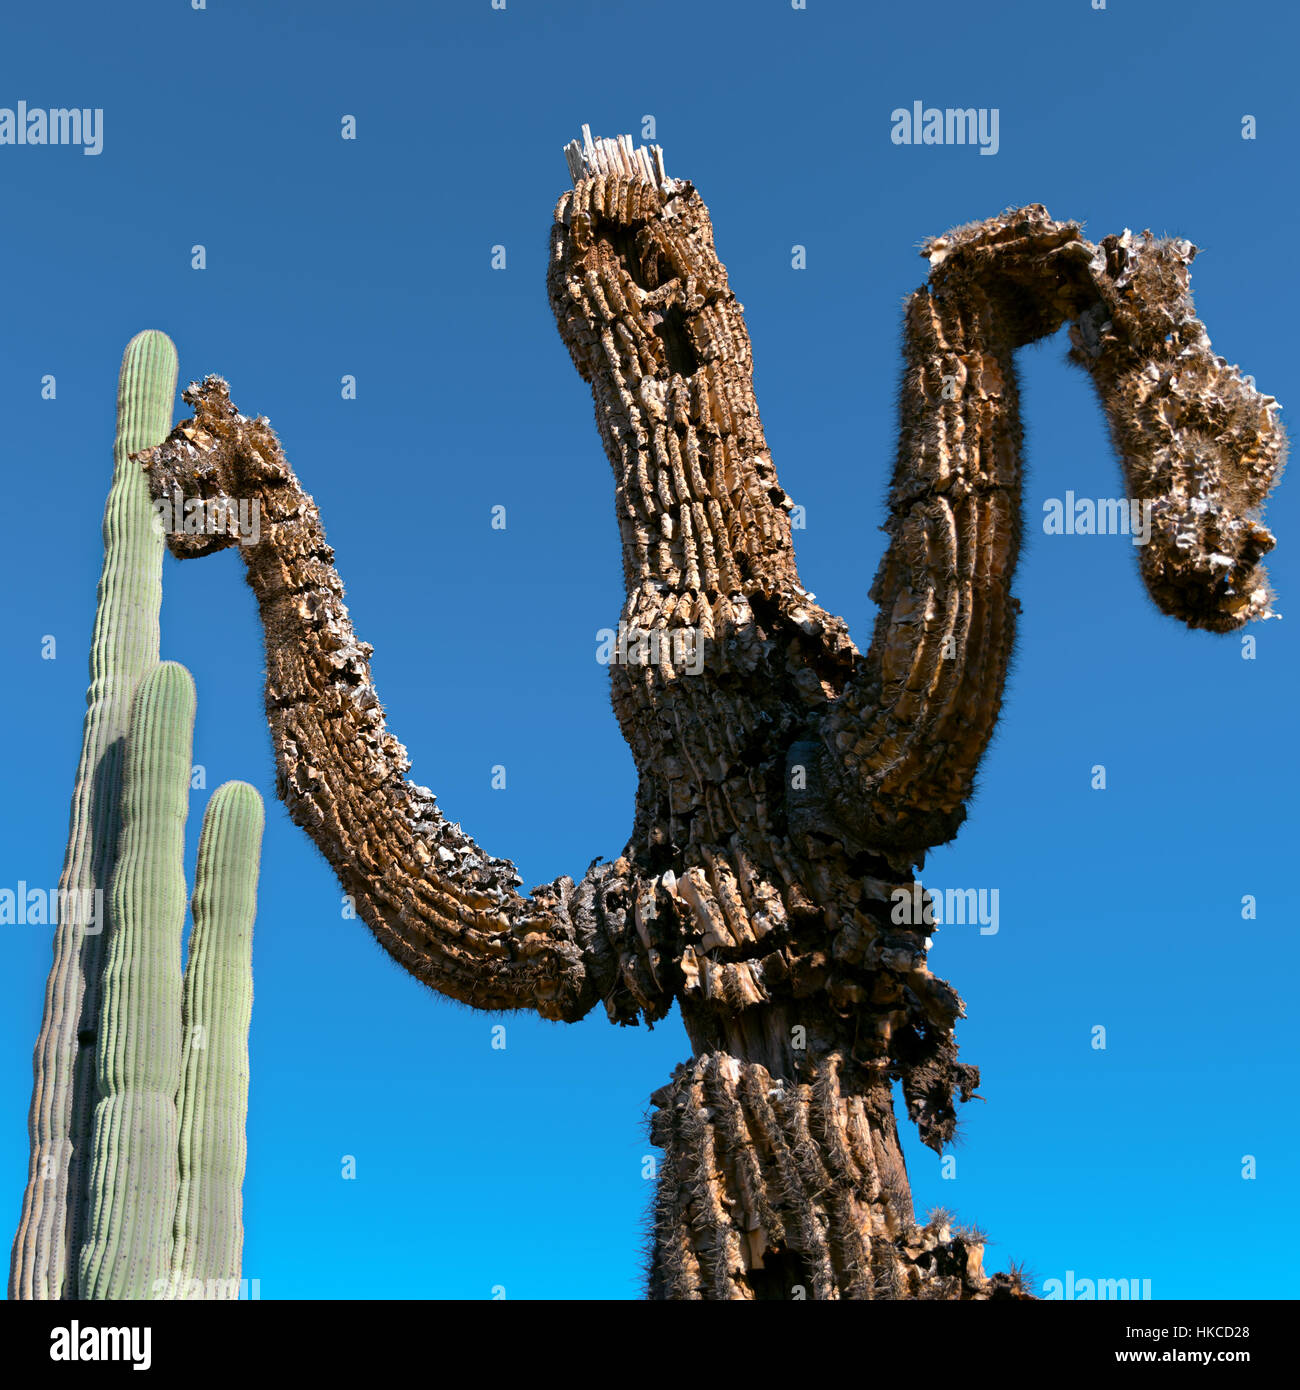 dead cactus with young cactus Stock Photo